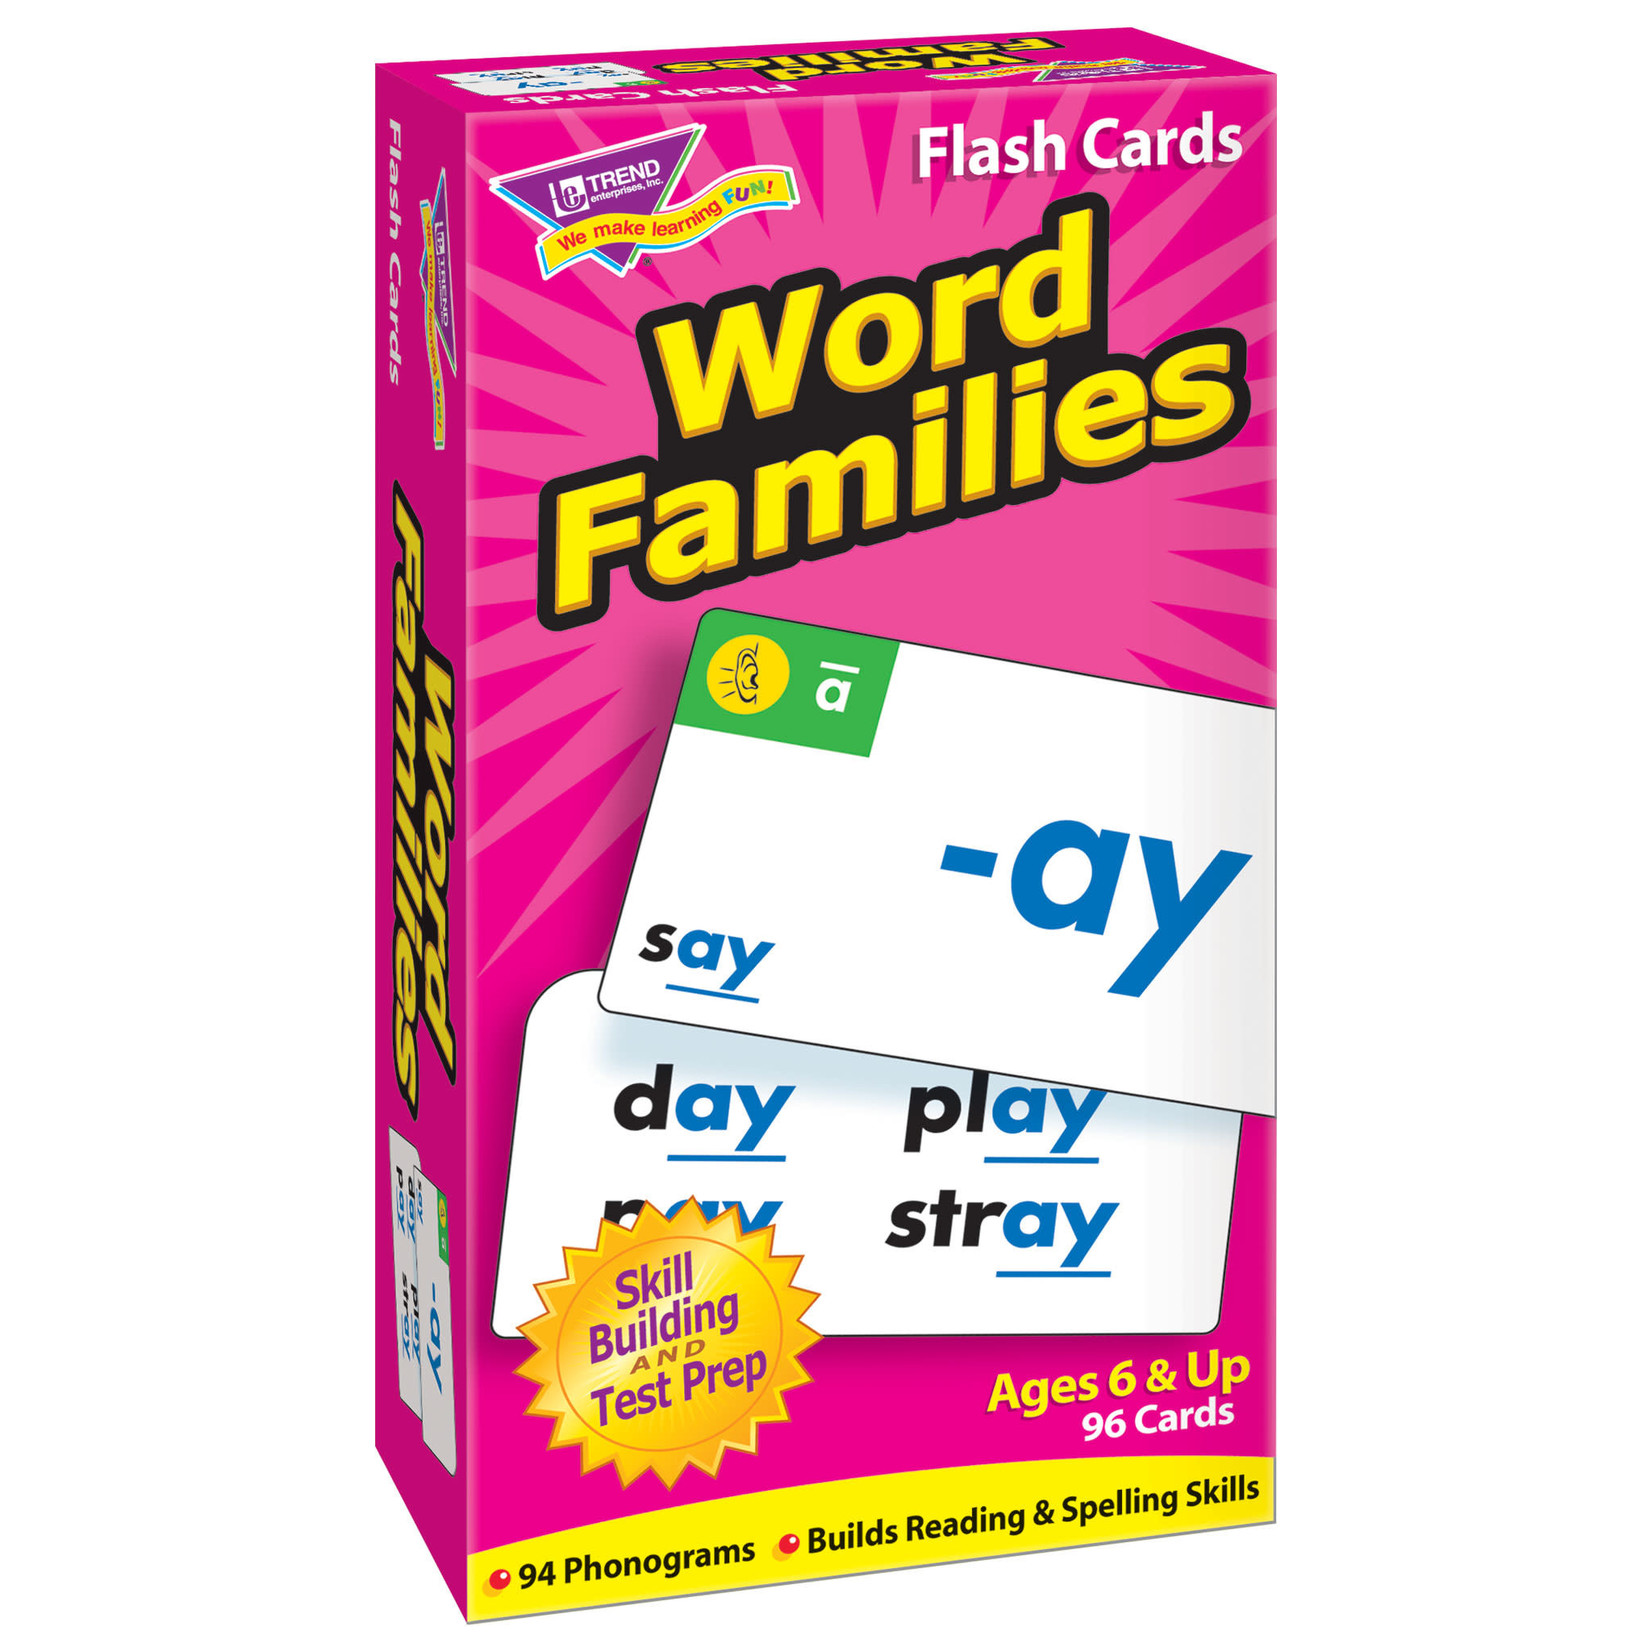 TREND Word Families Cards